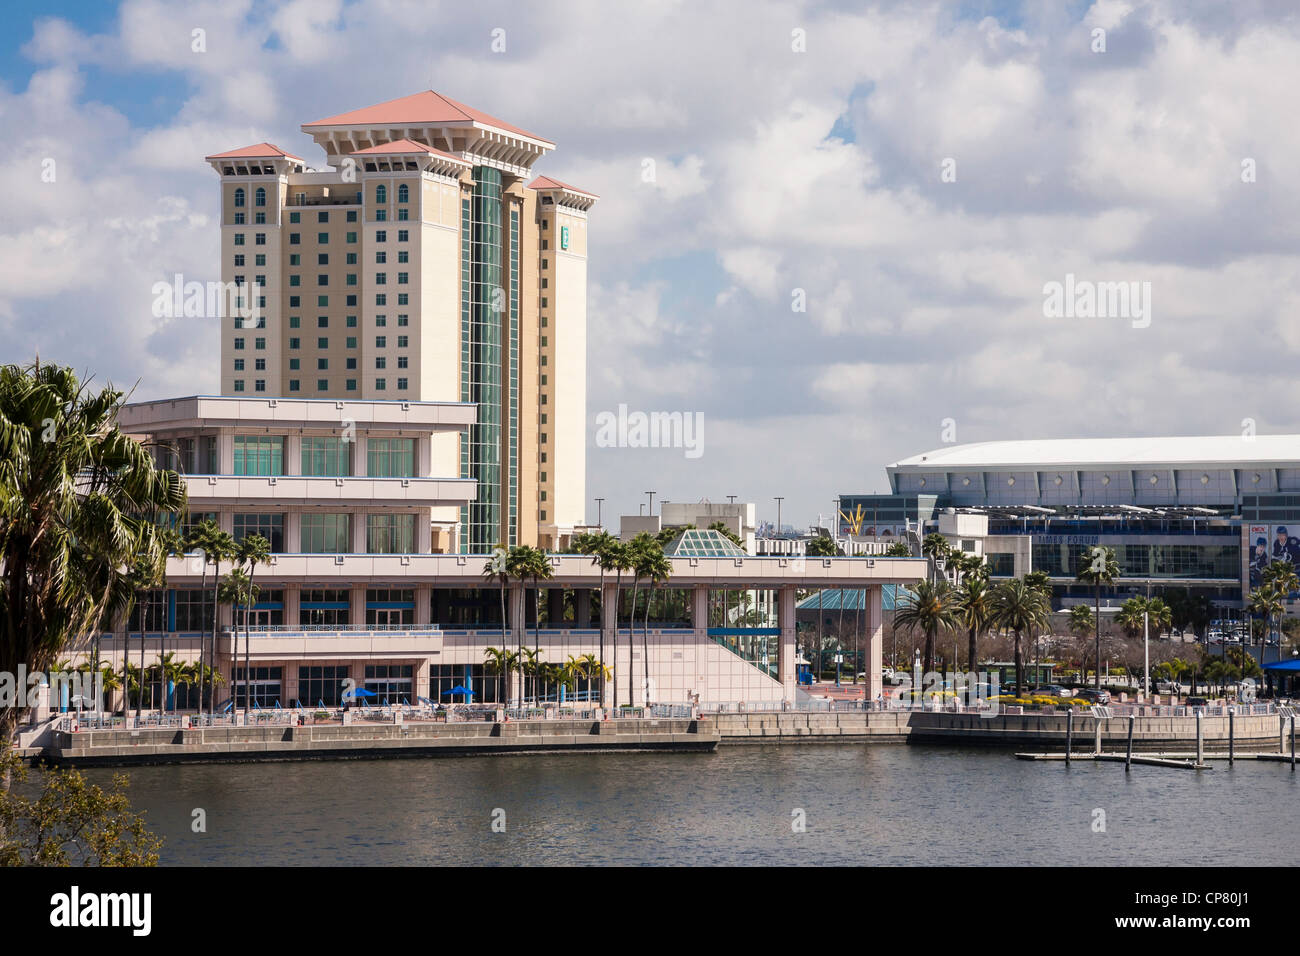 Embassy Suites Hotel and Hillsborough River, Tampa, FL Stock Photo